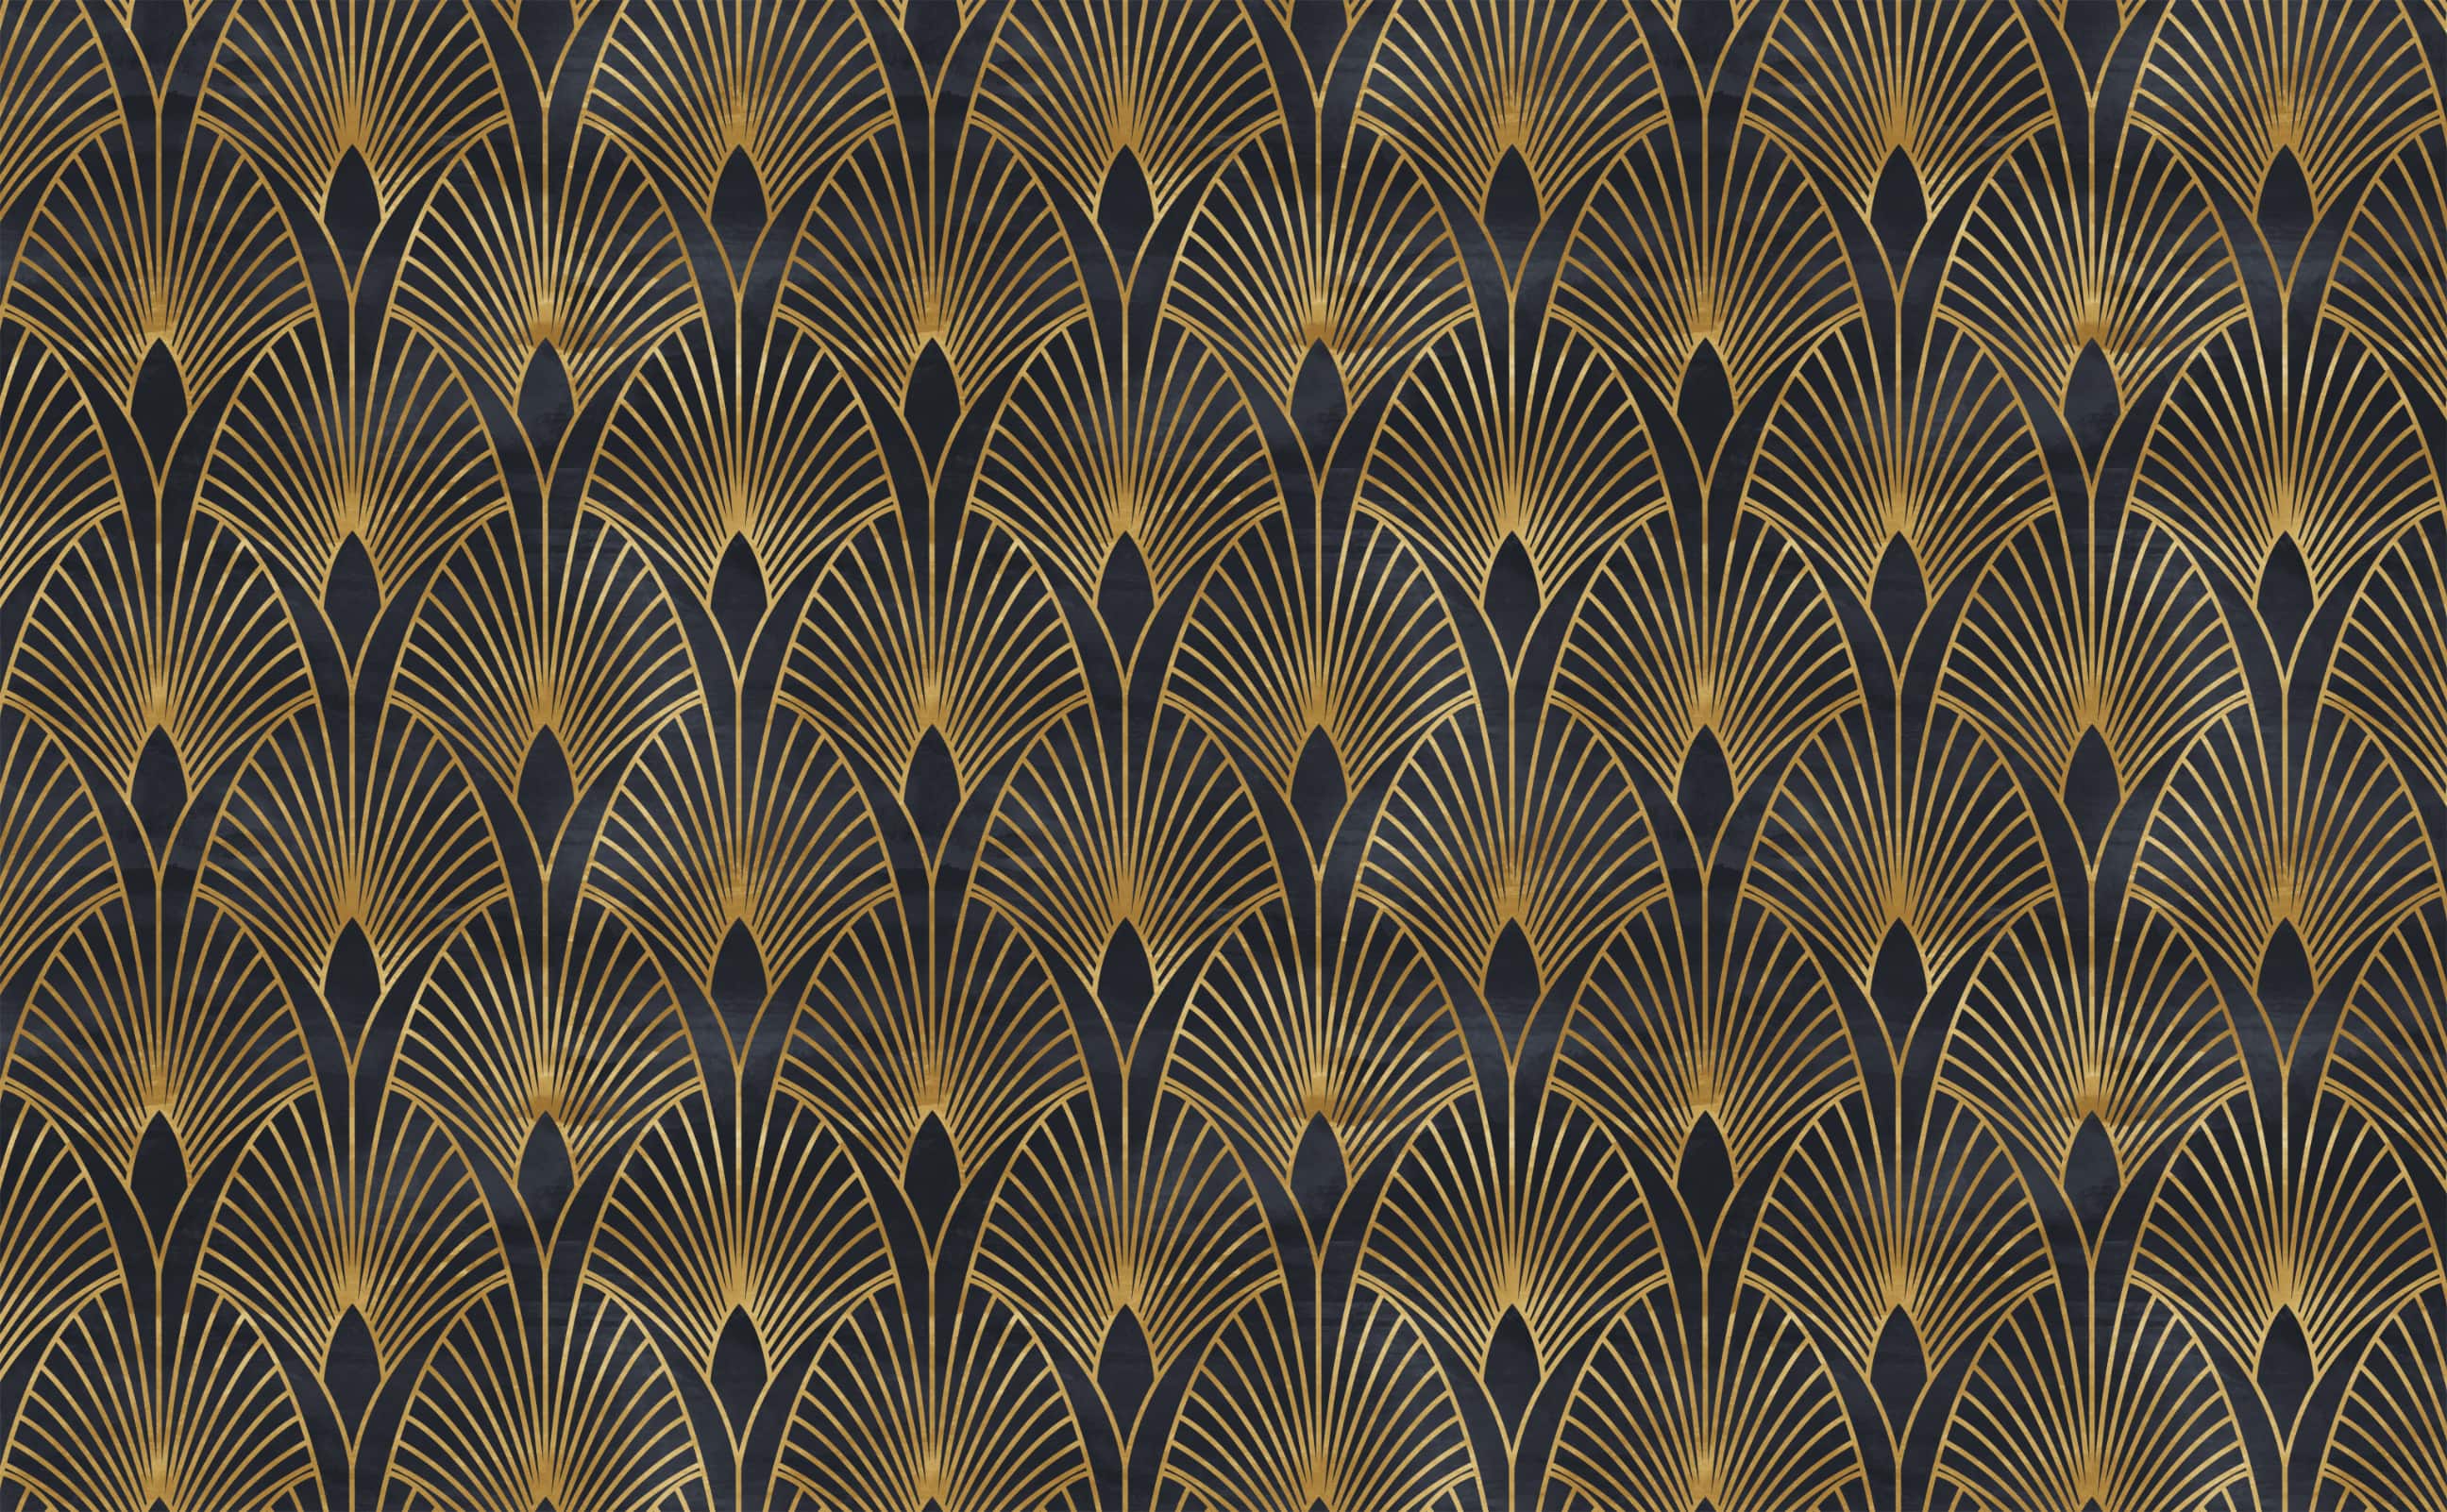 Photo Wallpaper Art deco fan - abstract with black fans on a gold  background - Backgrounds and patterns - Wall Murals